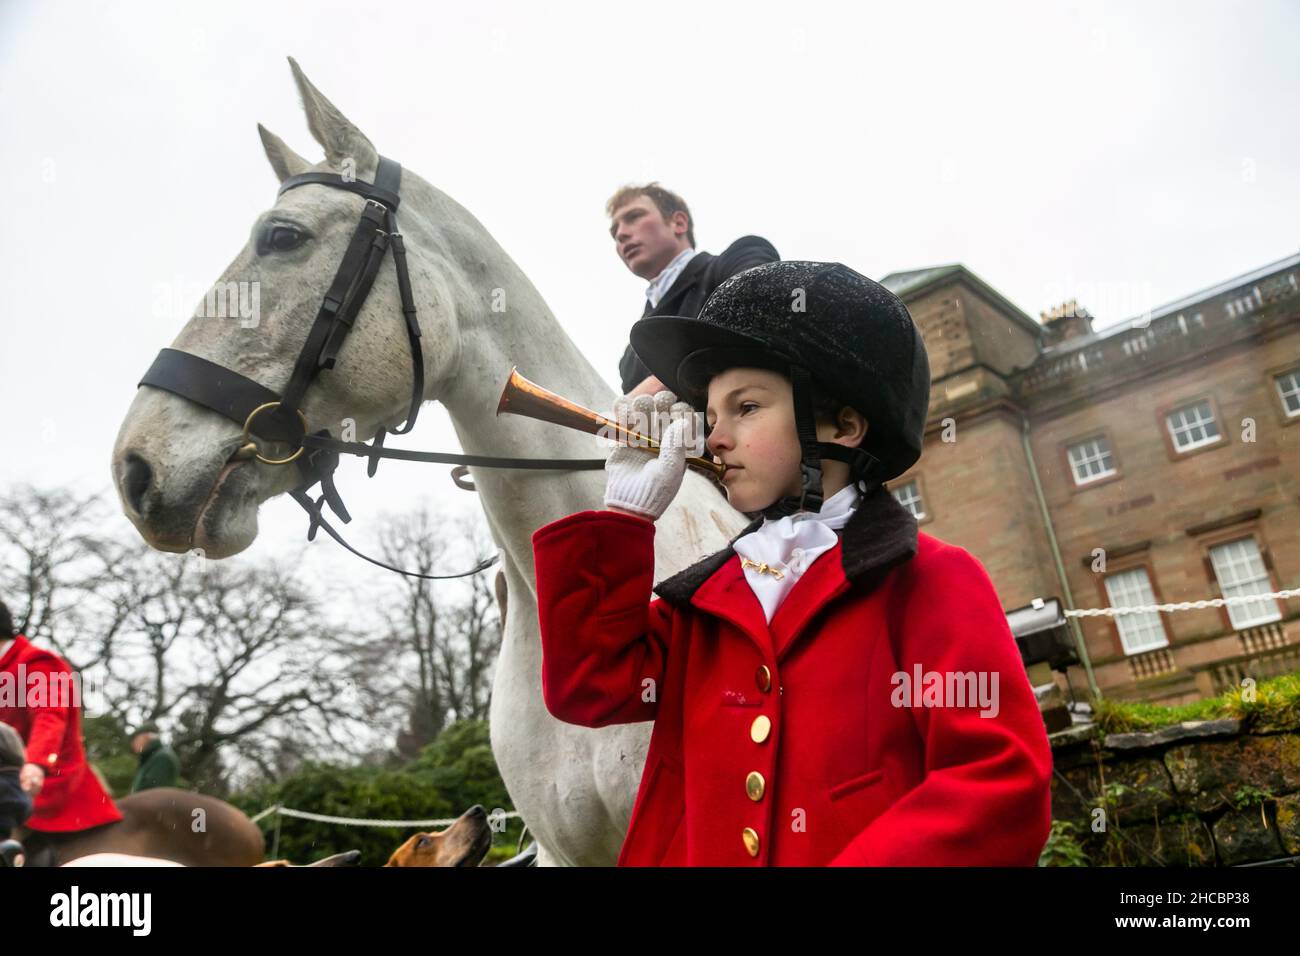 Hagley, Worcestershire, UK. 27th Dec, 2021. 8-year-old Henley Mills blows his horn at the first Albrighton and Woodland Hunt at Hagley Hall since the Coronavirus pandemic. The Albrighton and Woodland Hunt meet annually at Hagley Hall in Worcestershire. Credit: Peter Lopeman/Alamy Live News Stock Photo